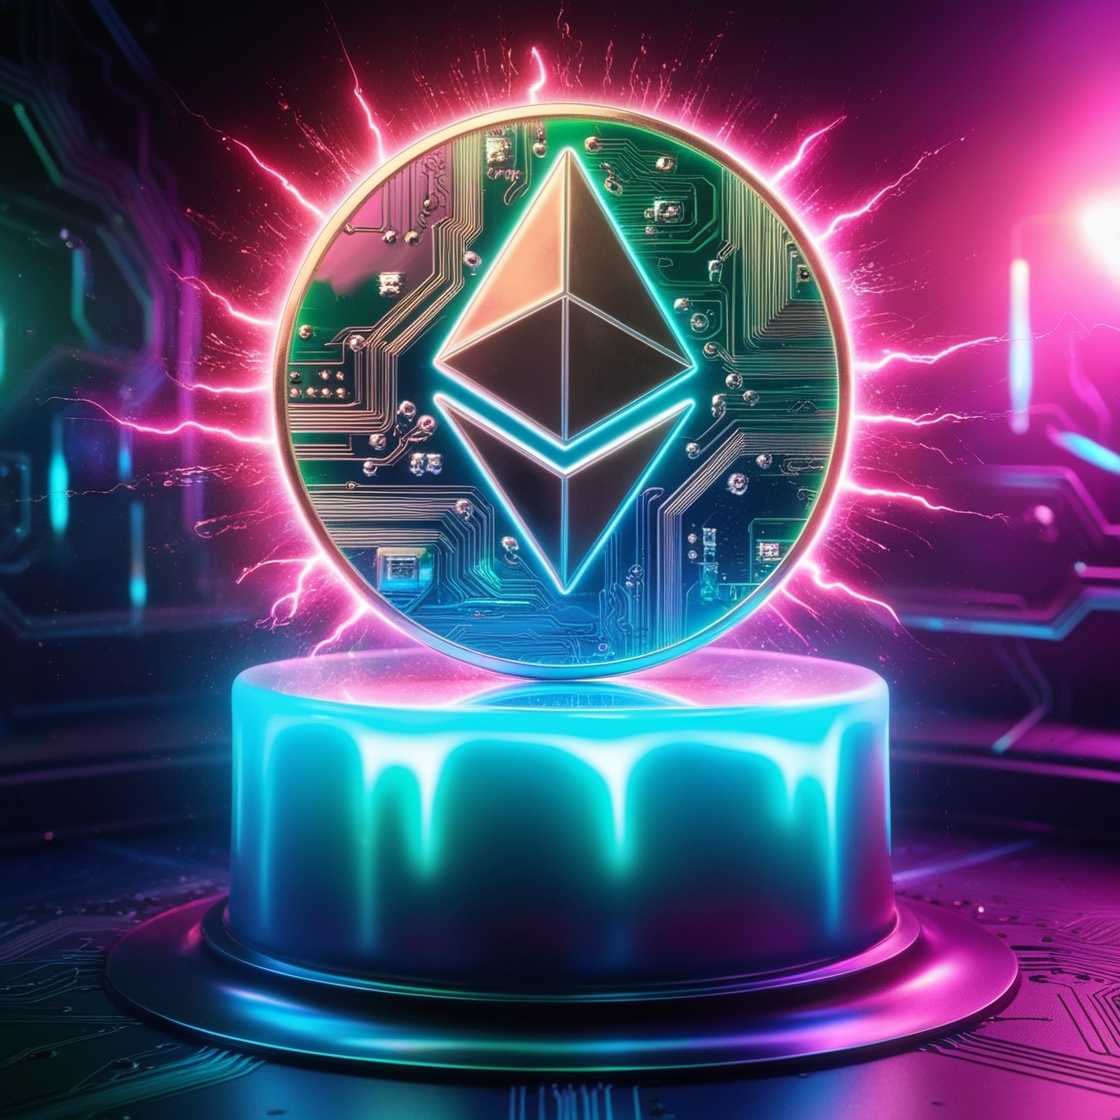 A futuristic, neon-lit, Ethereum token, sculpted from iridescent, motherboard-like materials, sits atop a glowing, electric blue pedestal, radiating an otherworldly aura, as if harboring the secrets of the blockchain universe. The token's surface shimmers with an oil-slick sheen, revealing intricate, circuit-board patterns that seem to pulse with energy. The atmosphere is immersive, with vibrant, electric hues of pink, green, and blue casting an hypnotic glow, evoking a sense of digital mysticism and wonder, transporting the viewer into a world of decentralized magic and infinite possibility.